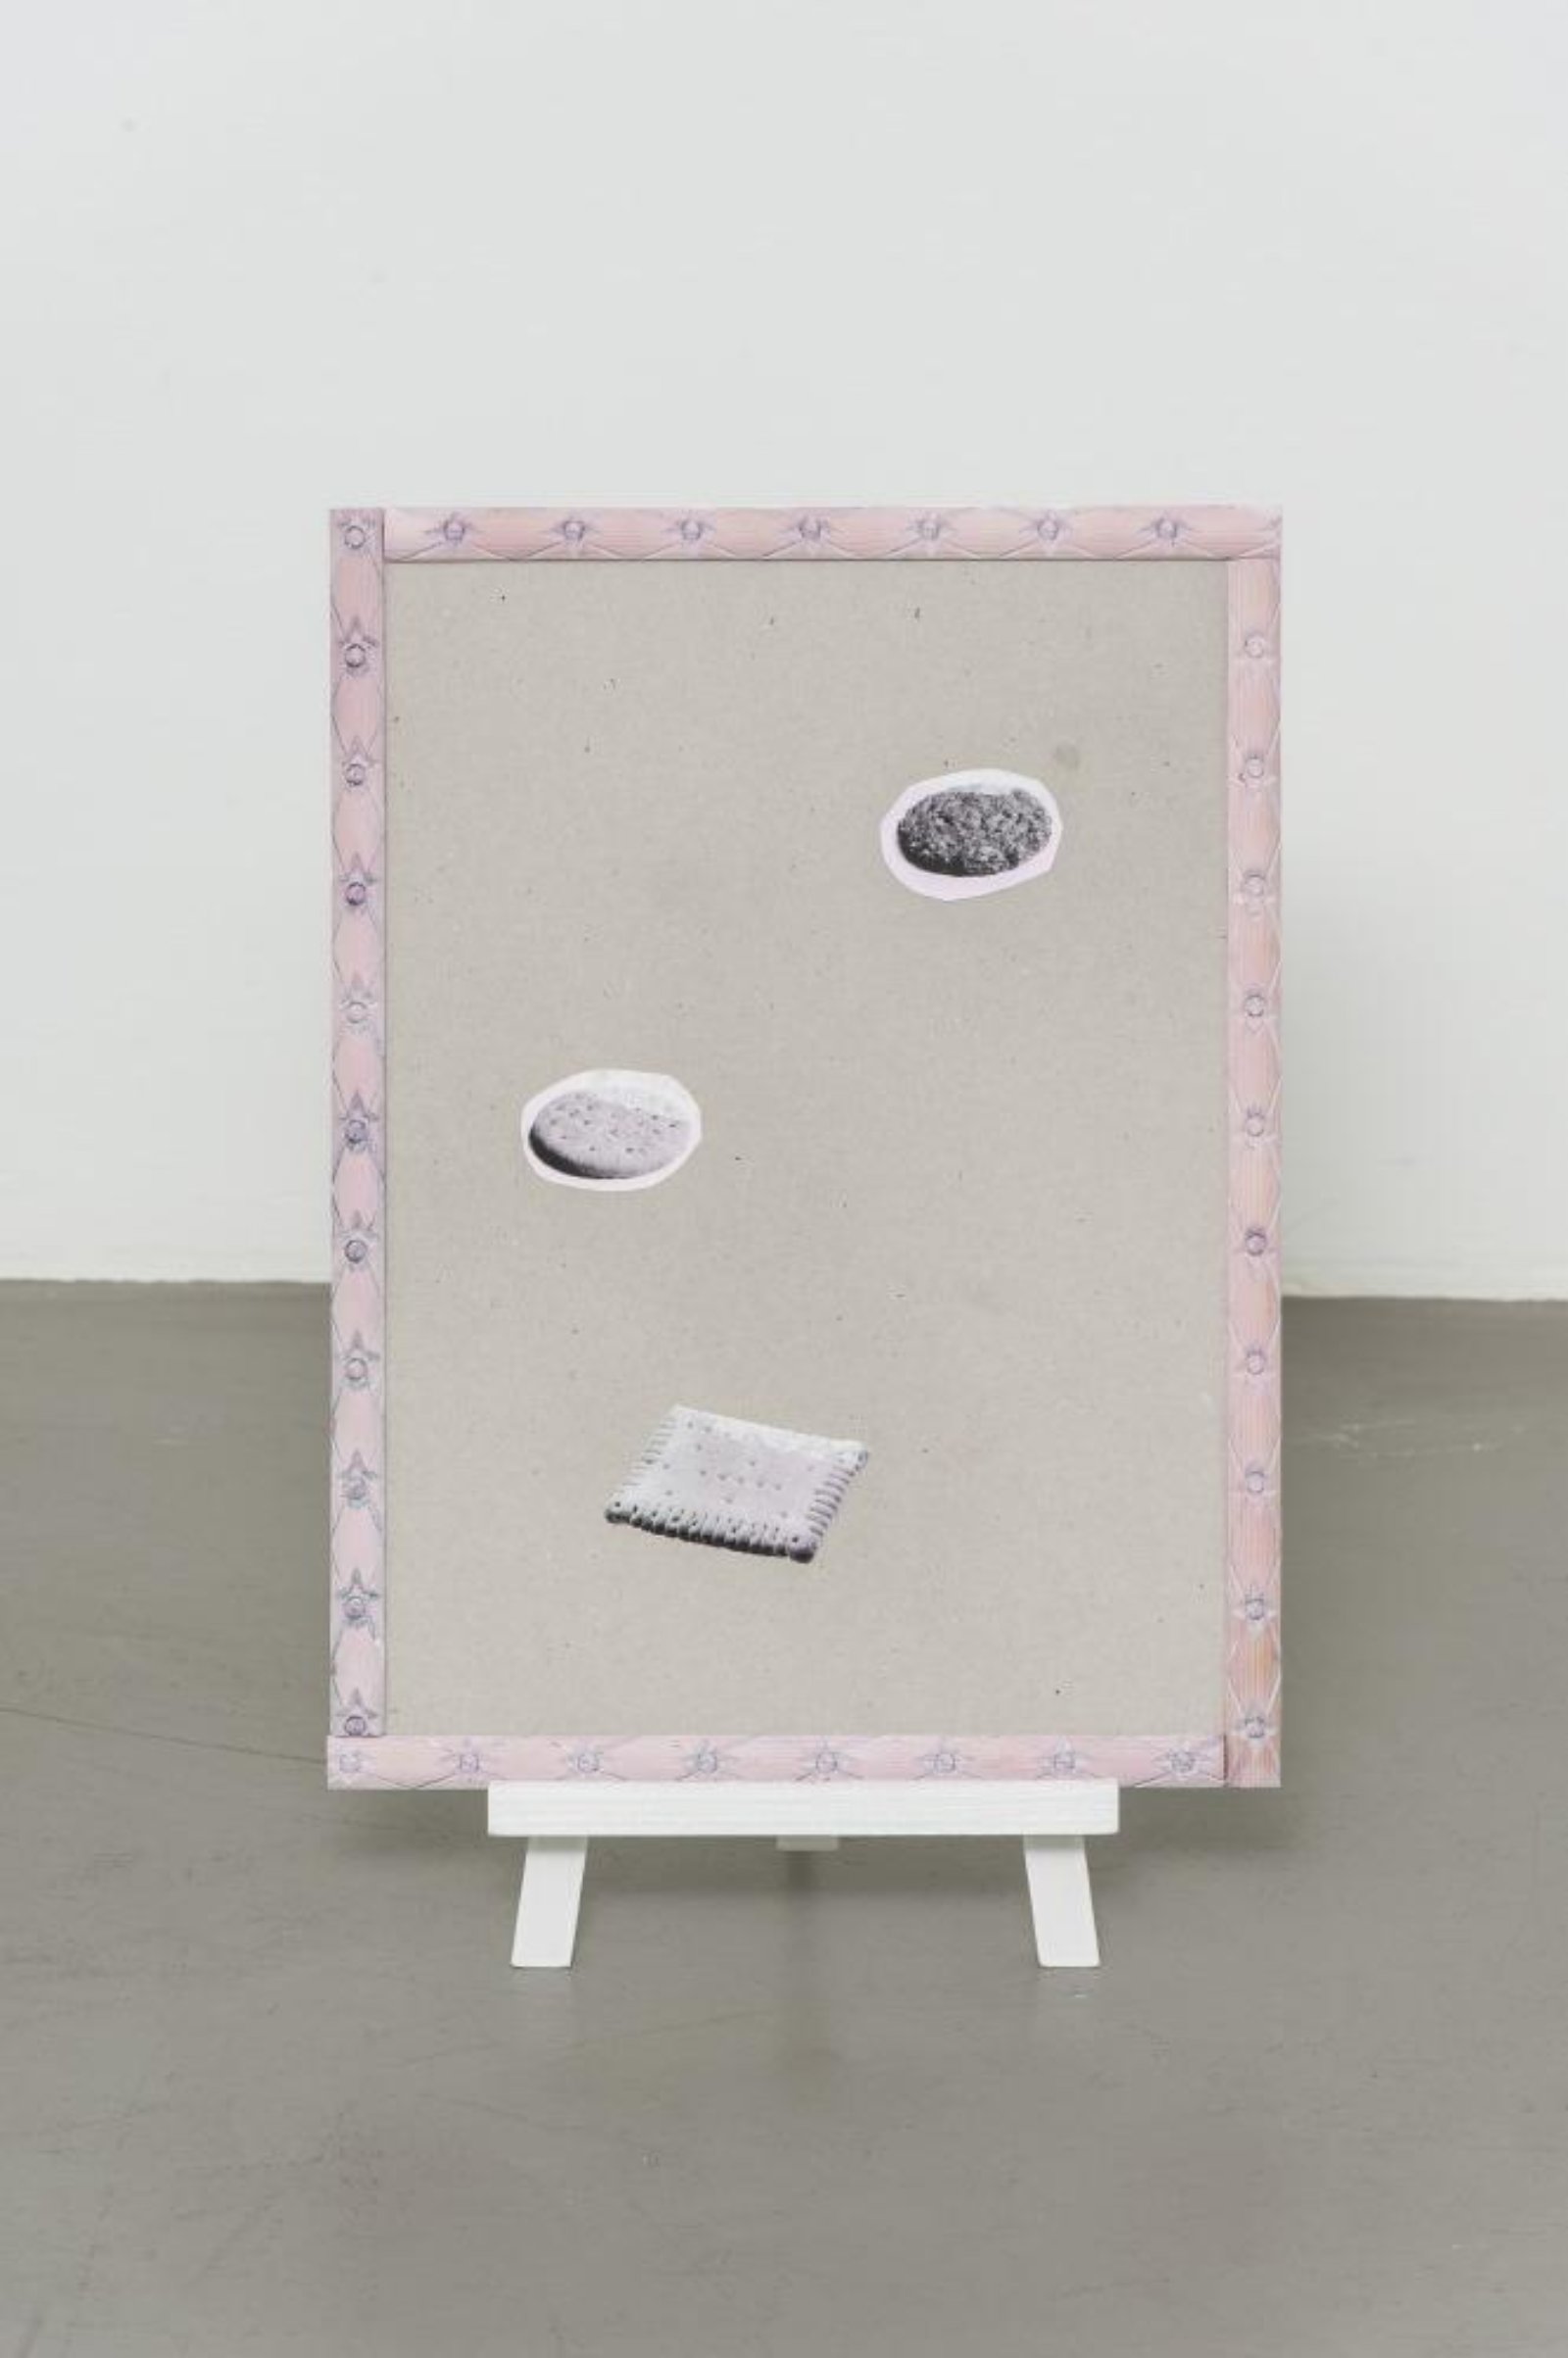 Ashes Withyman, Biscuits, 2014, rat poison, cardboard, photocopies, wood, metal, 18 x 13 x 7 in. (46 x 32 x 18 cm)